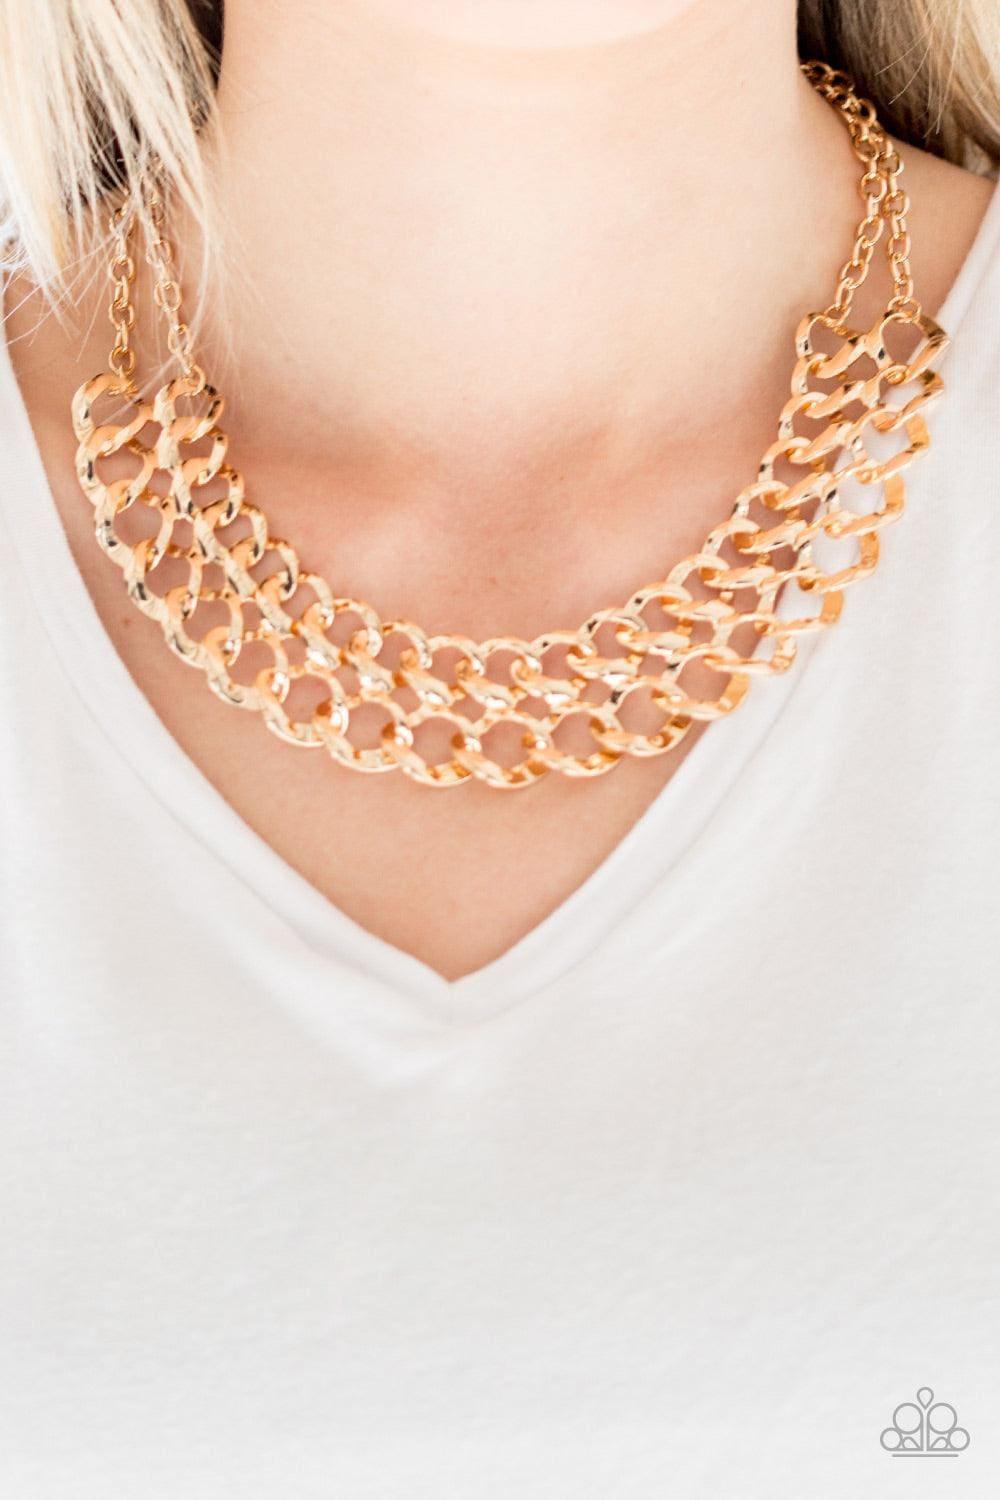 Paparazzi Accessories - Street Meet And Greet - Gold Necklace - Bling by JessieK